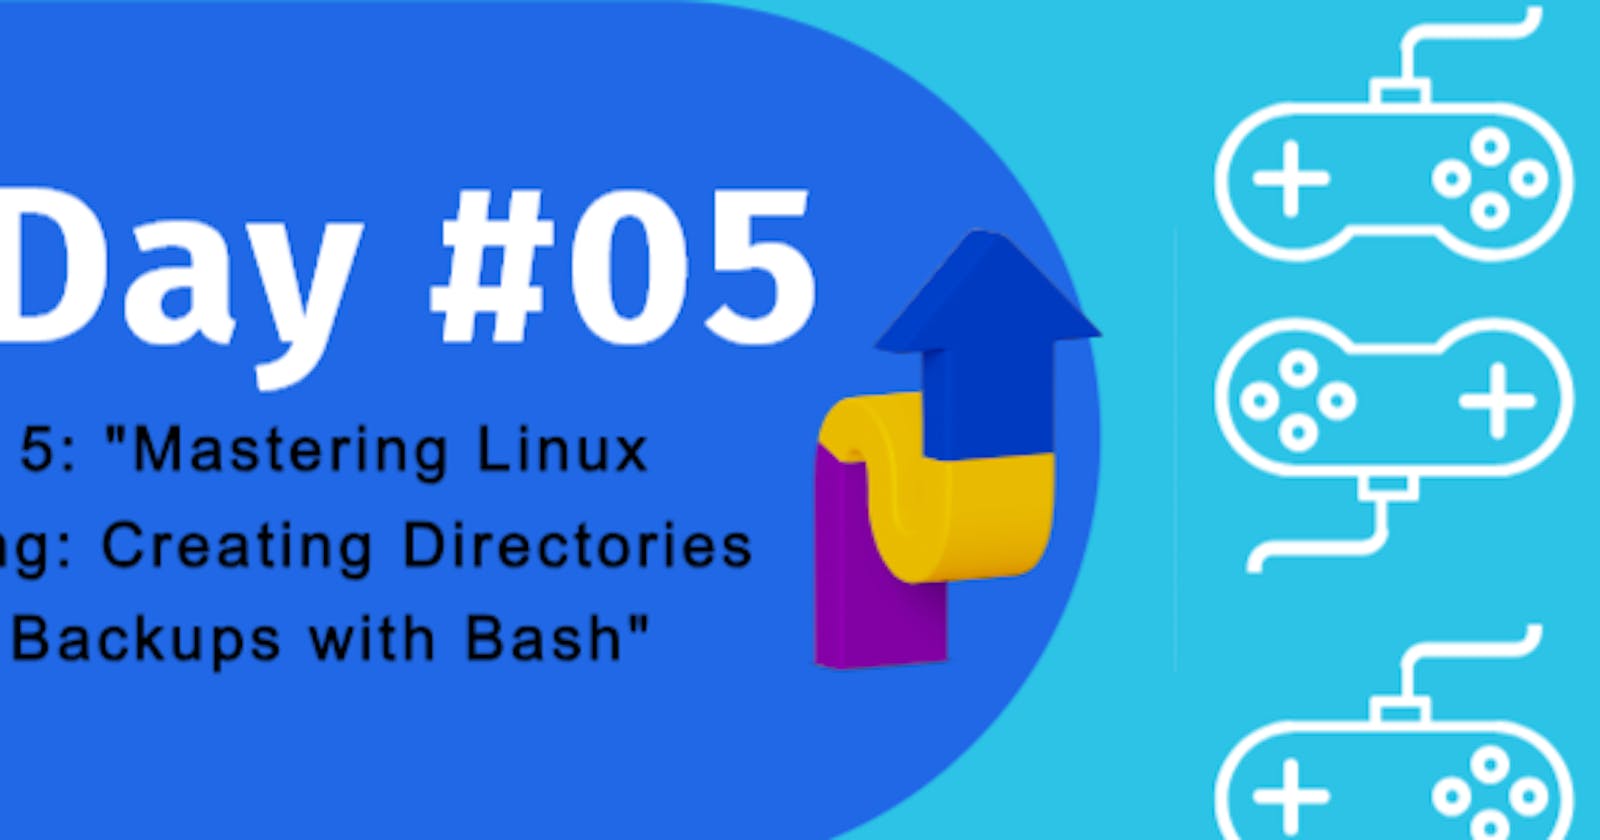 Day 5: "Mastering Linux Scripting: Creating Directories and Backups with Bash"